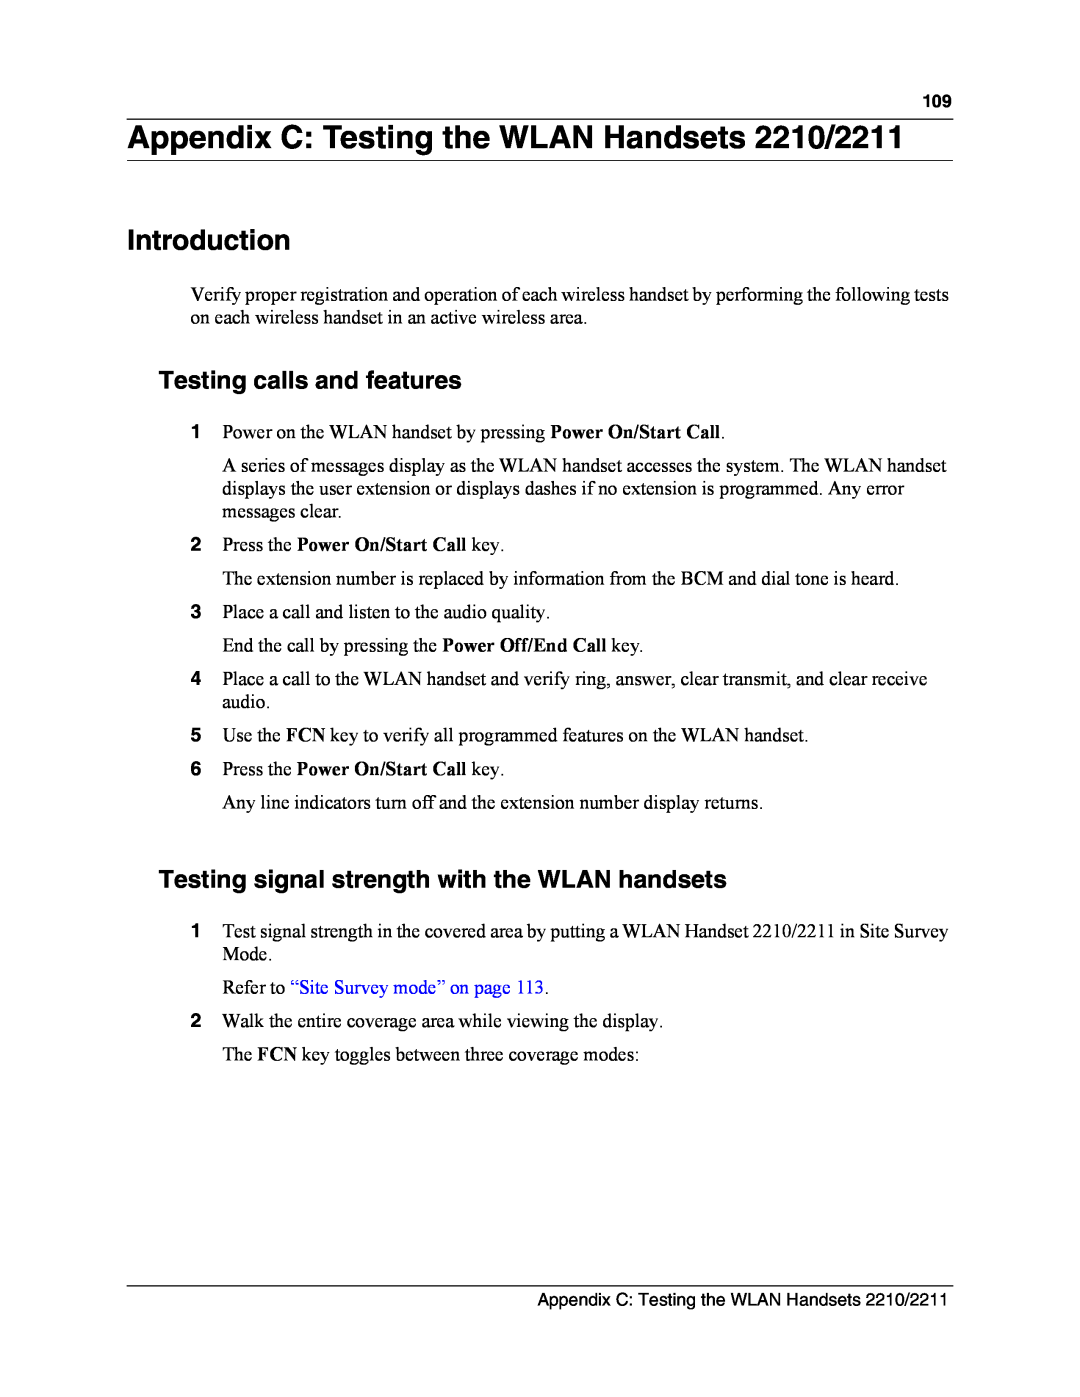 Nortel Networks MOG6xx, MOG7xx Appendix C Testing the WLAN Handsets 2210/2211, Testing calls and features, Introduction 